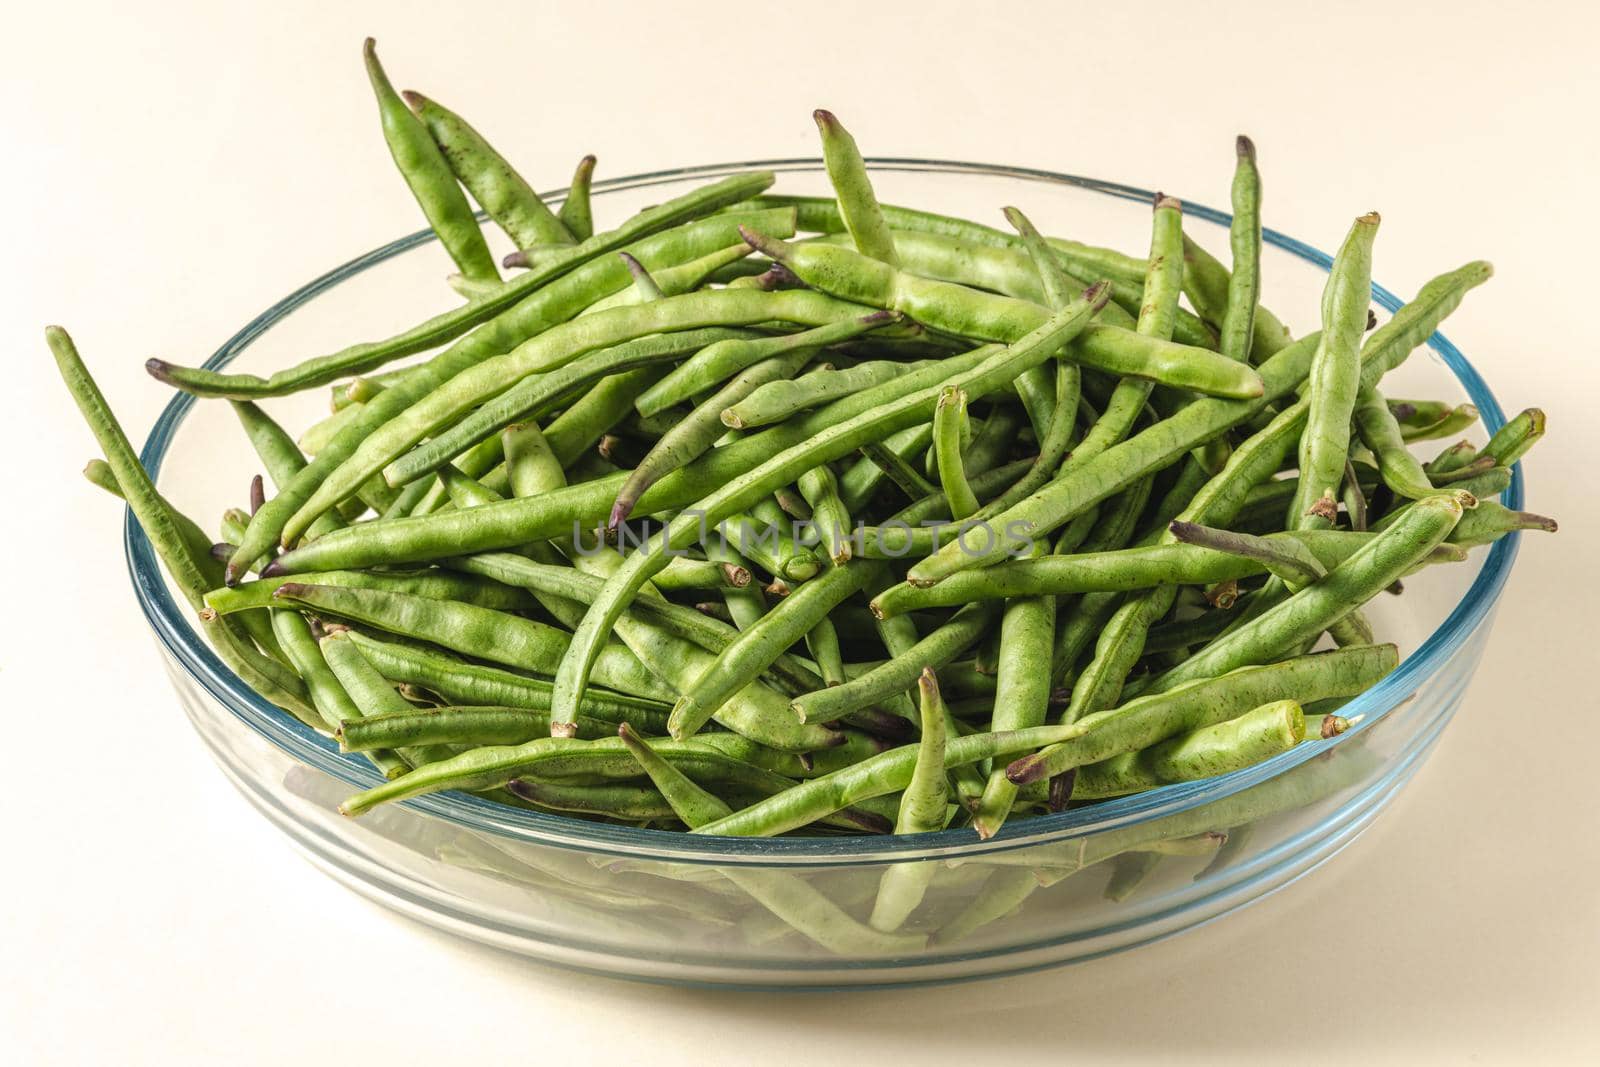 Fresh green beans in a glass bowl. Healthy eating concept by Sonat